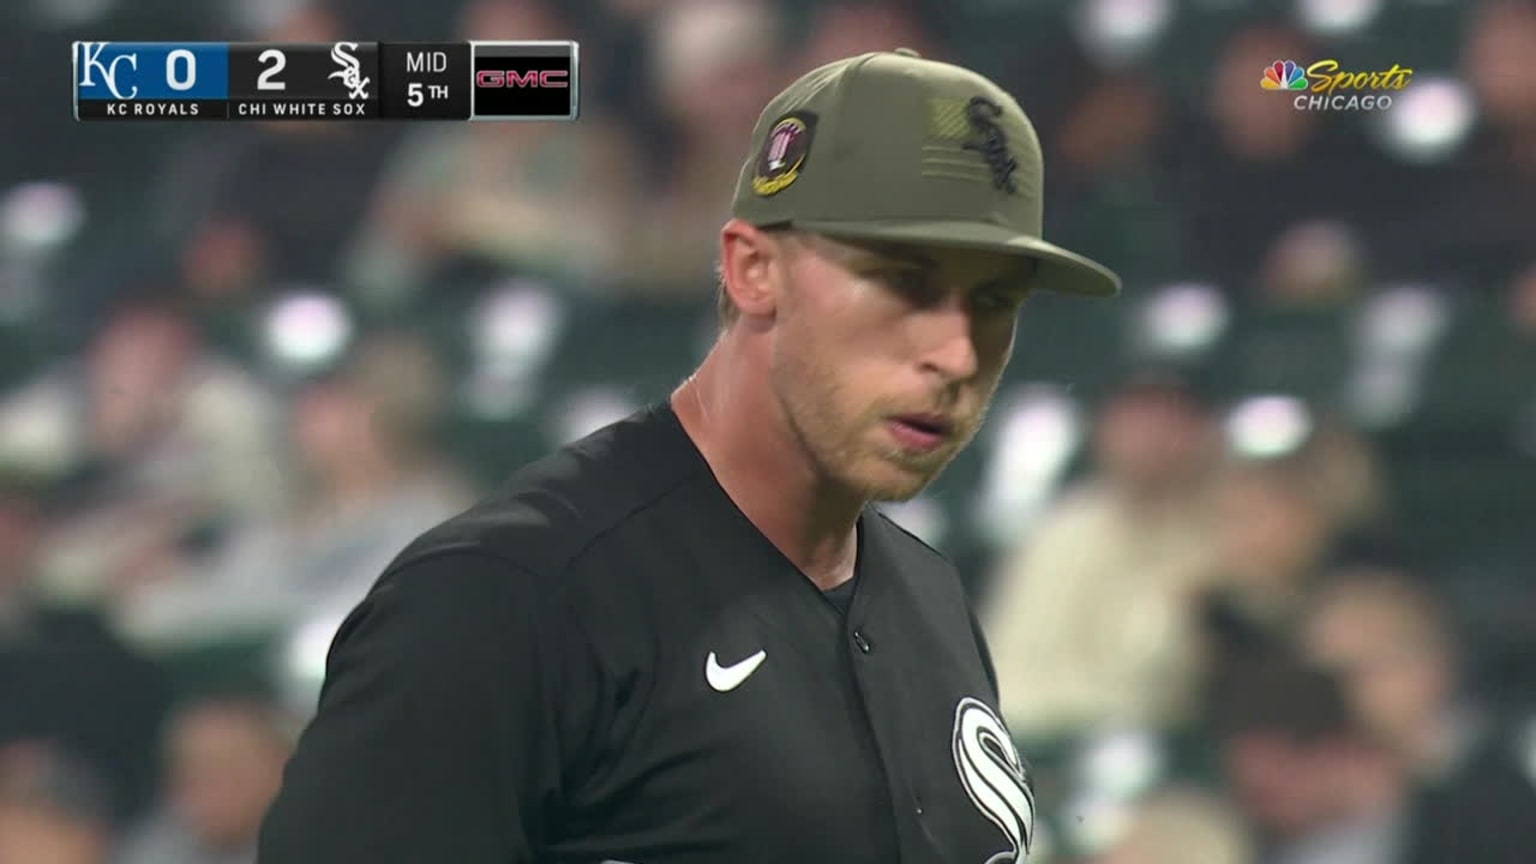 white sox hat on head